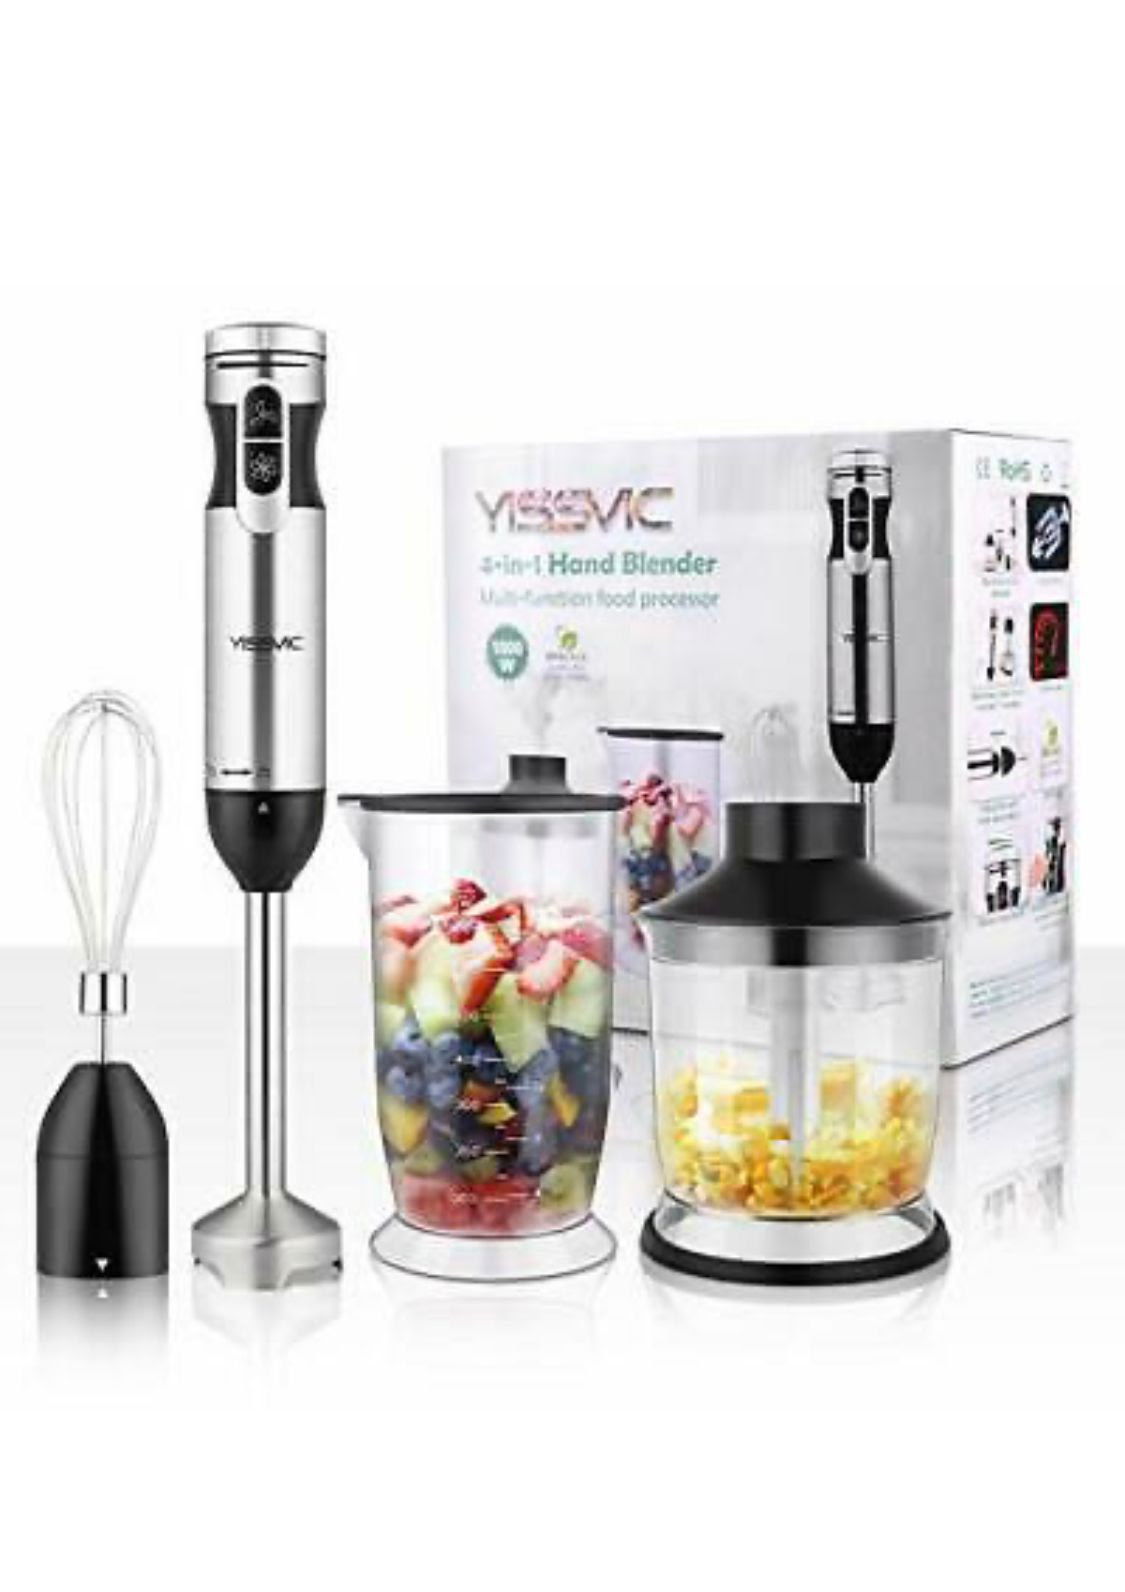 YISSVIC Hand Blender 1000W 4 In 1 Immersion Blender. 900units. EXW Los Angeles 